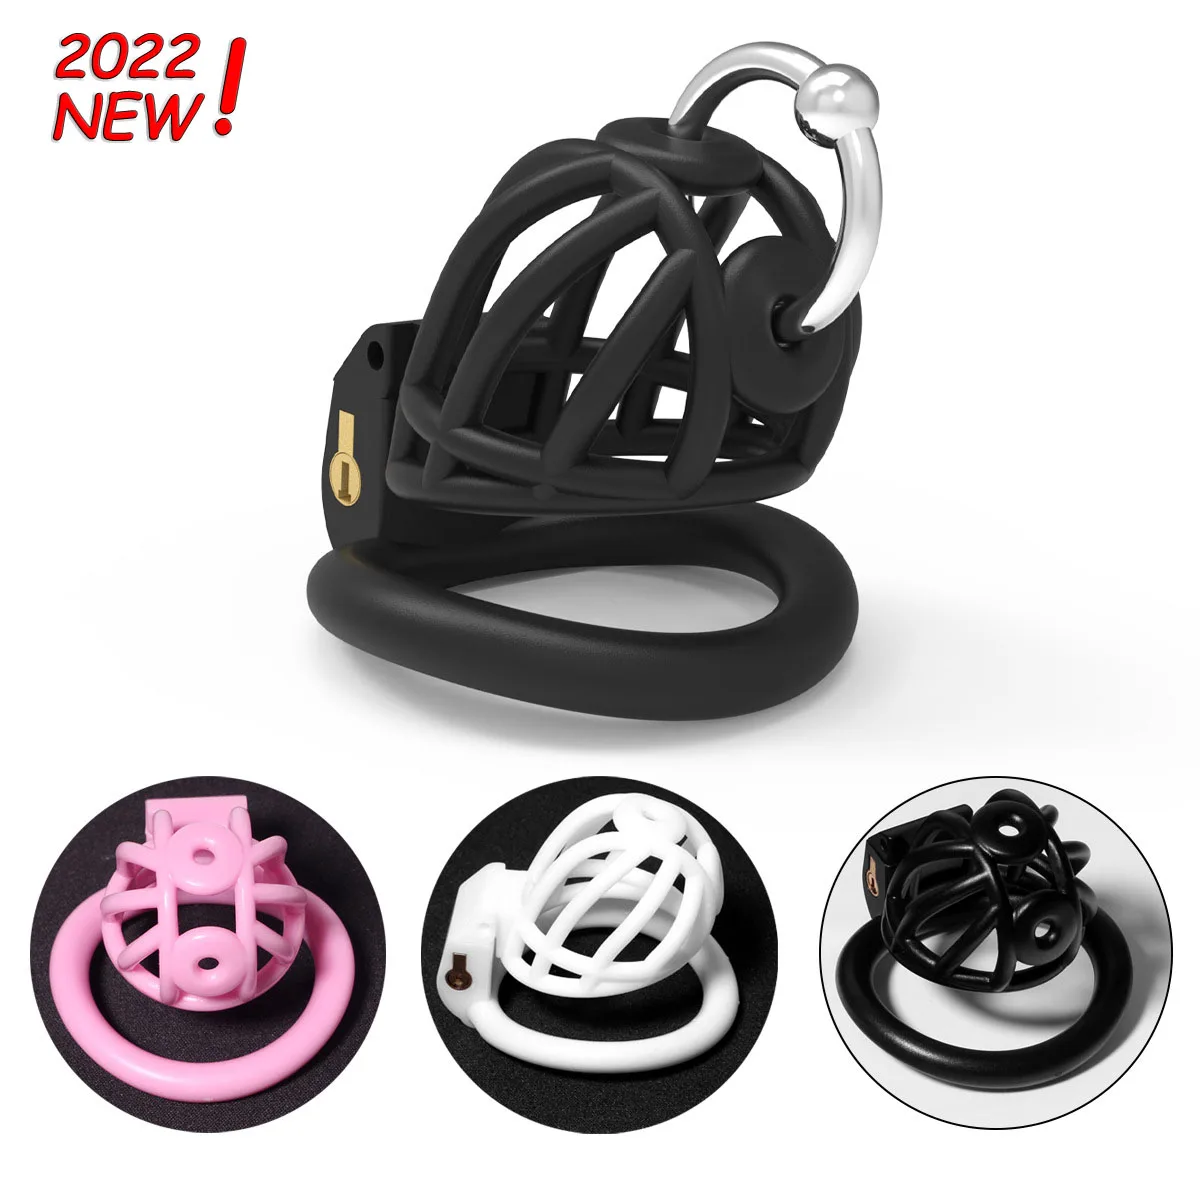 New Free Shipping Cheap Bargain Gift Resin Chastity Lock Male Cock Cage Toys Ring At the price of surprise Sex De Adult PA